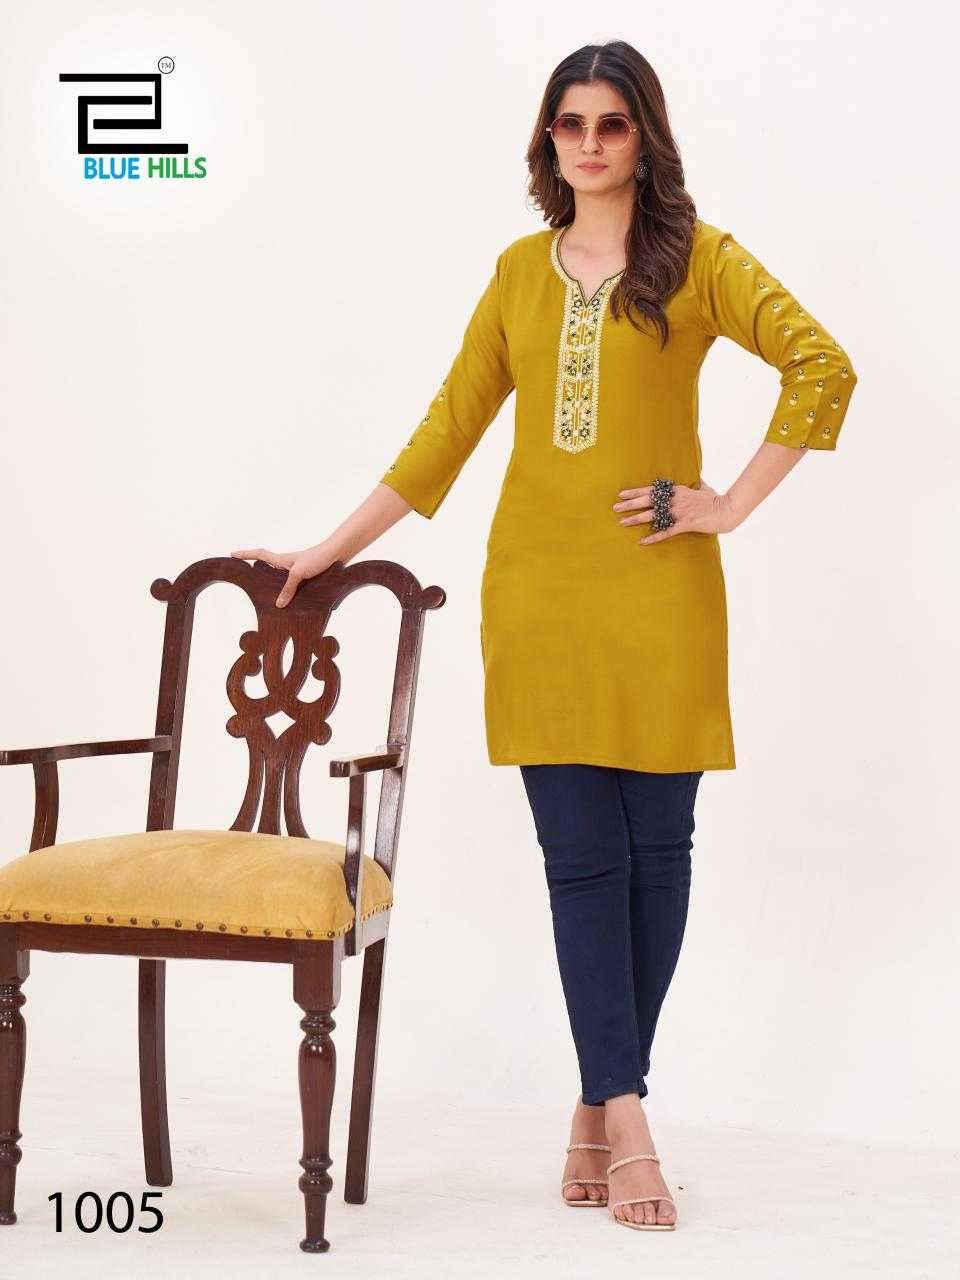 BLOOM SERIES 1001 TO 1006 BY BLUE HILLS DESIGNER WITH WORK RAYON TOPS ARE AVAILABLE AT WHOLESALE PRICE